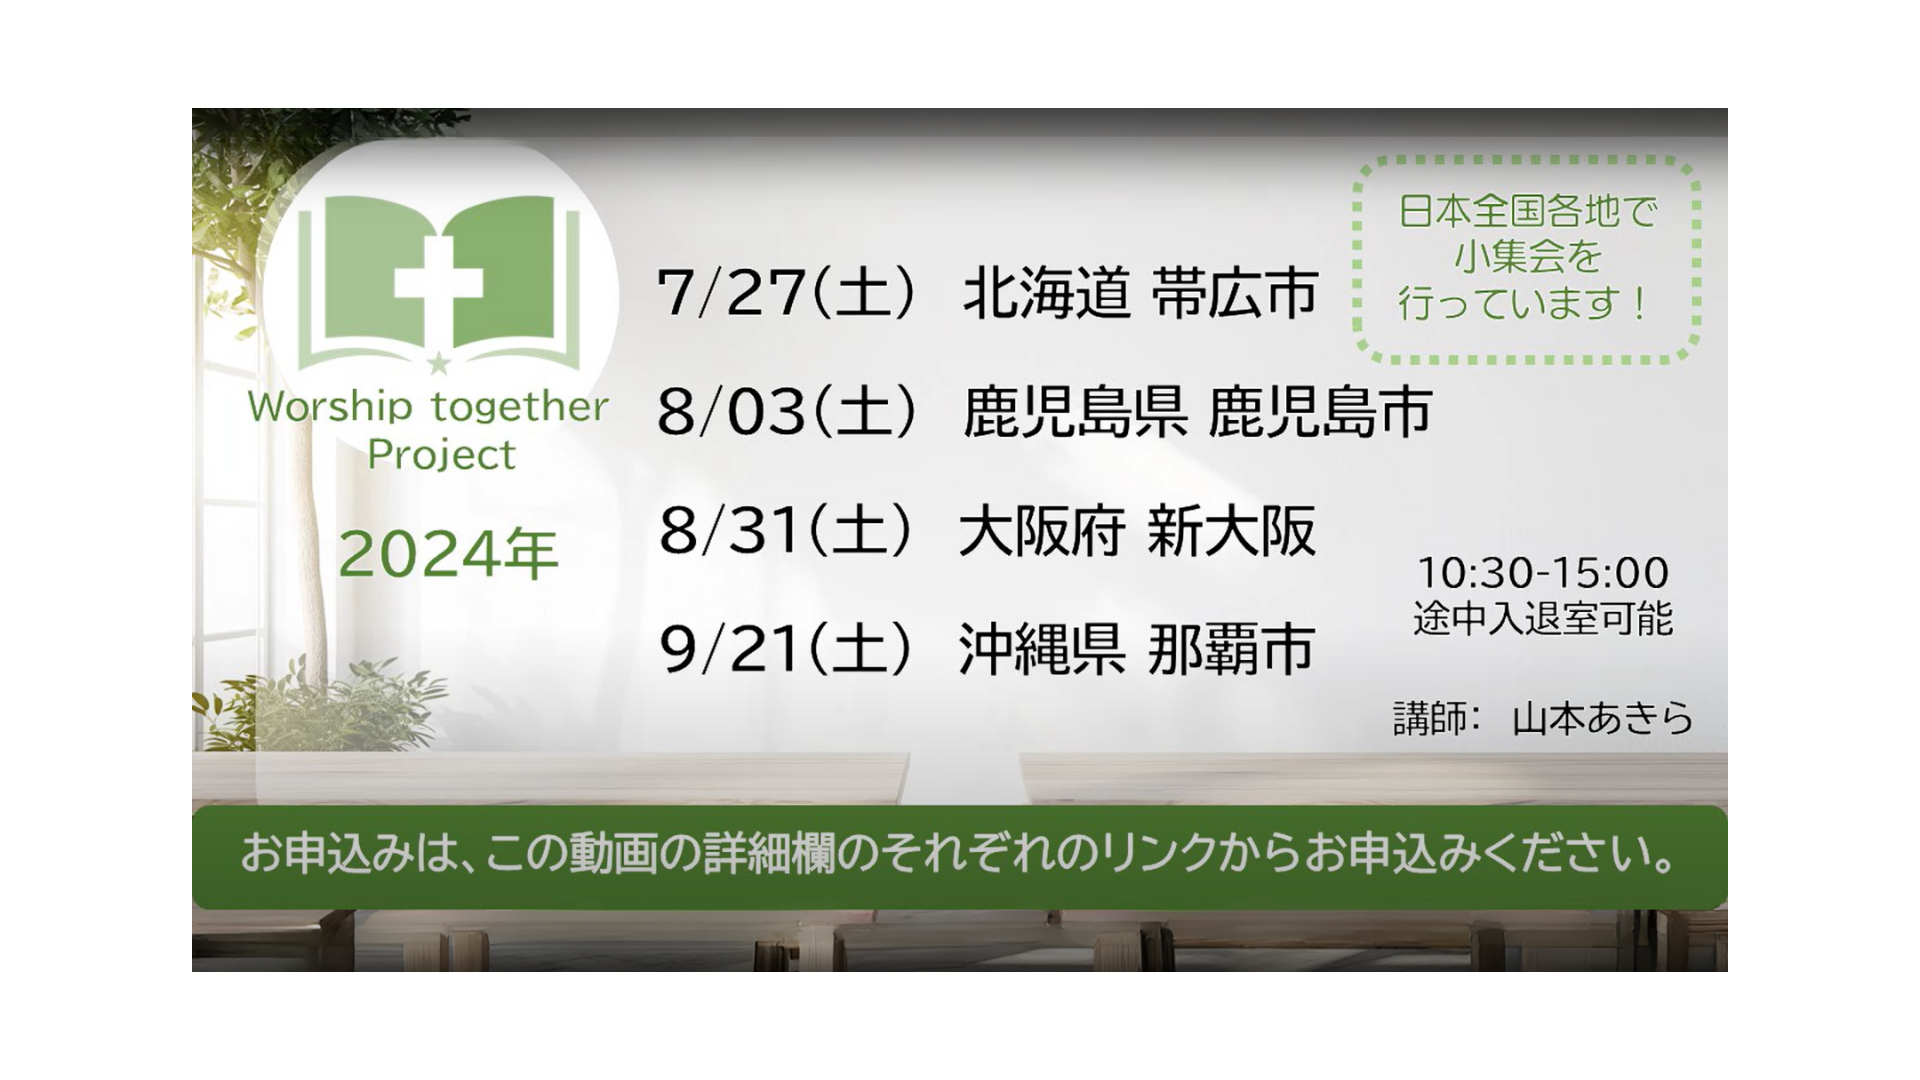 『Worship together Project』のご案内